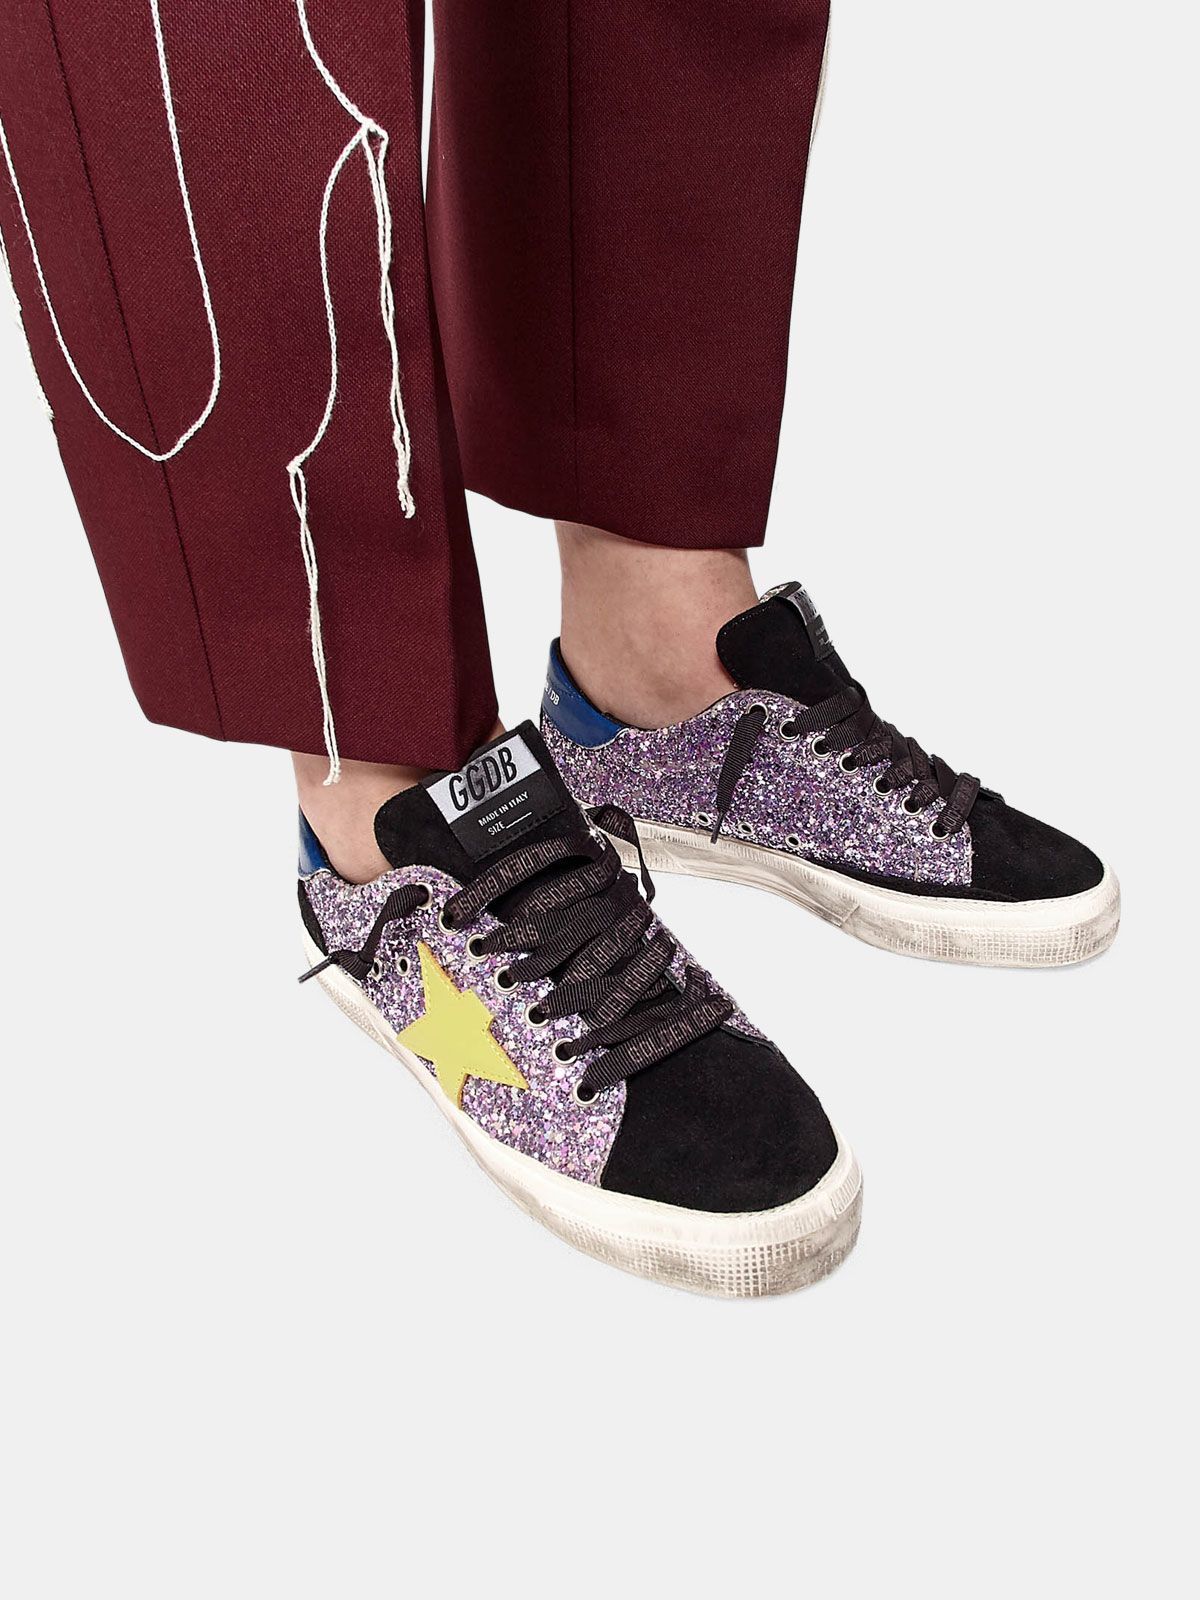 sneakers in glitter and suede leather | Golden Goose